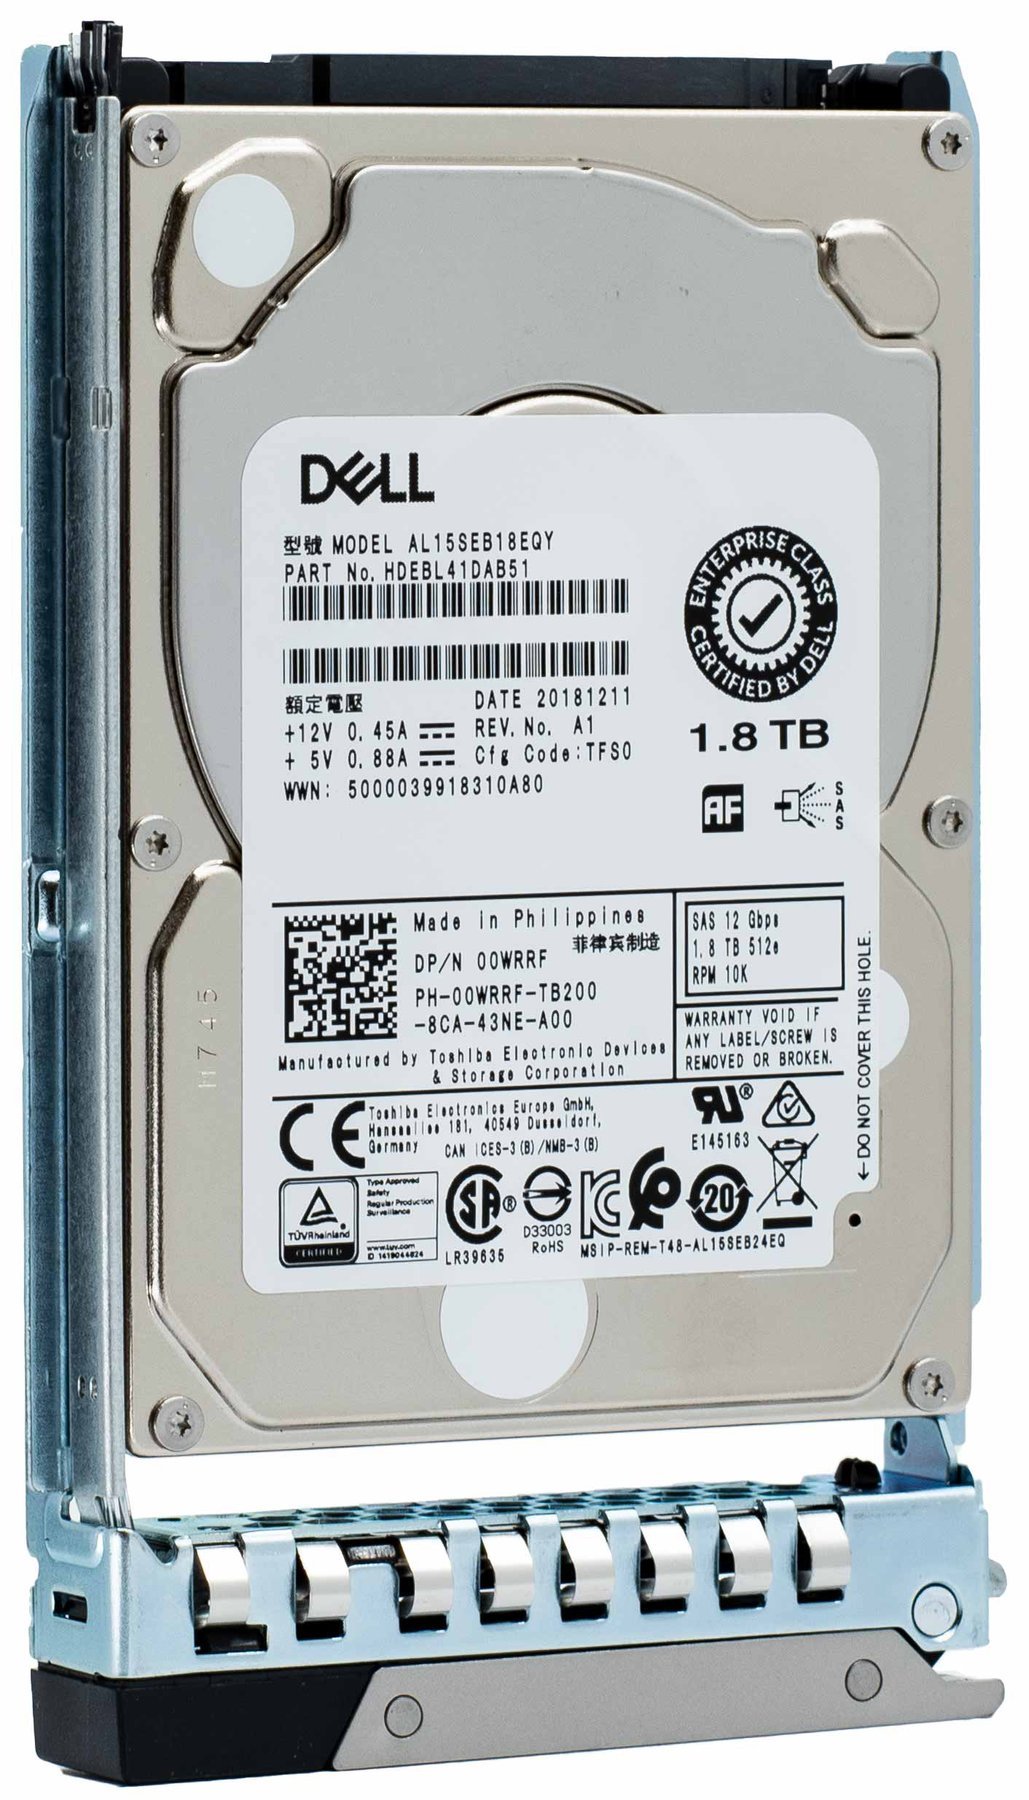 Dell G14 400-ARXC 1.8TB 10K RPM SATA 12Gb/s 512e 2.5" Manufacturer Recertified HDD